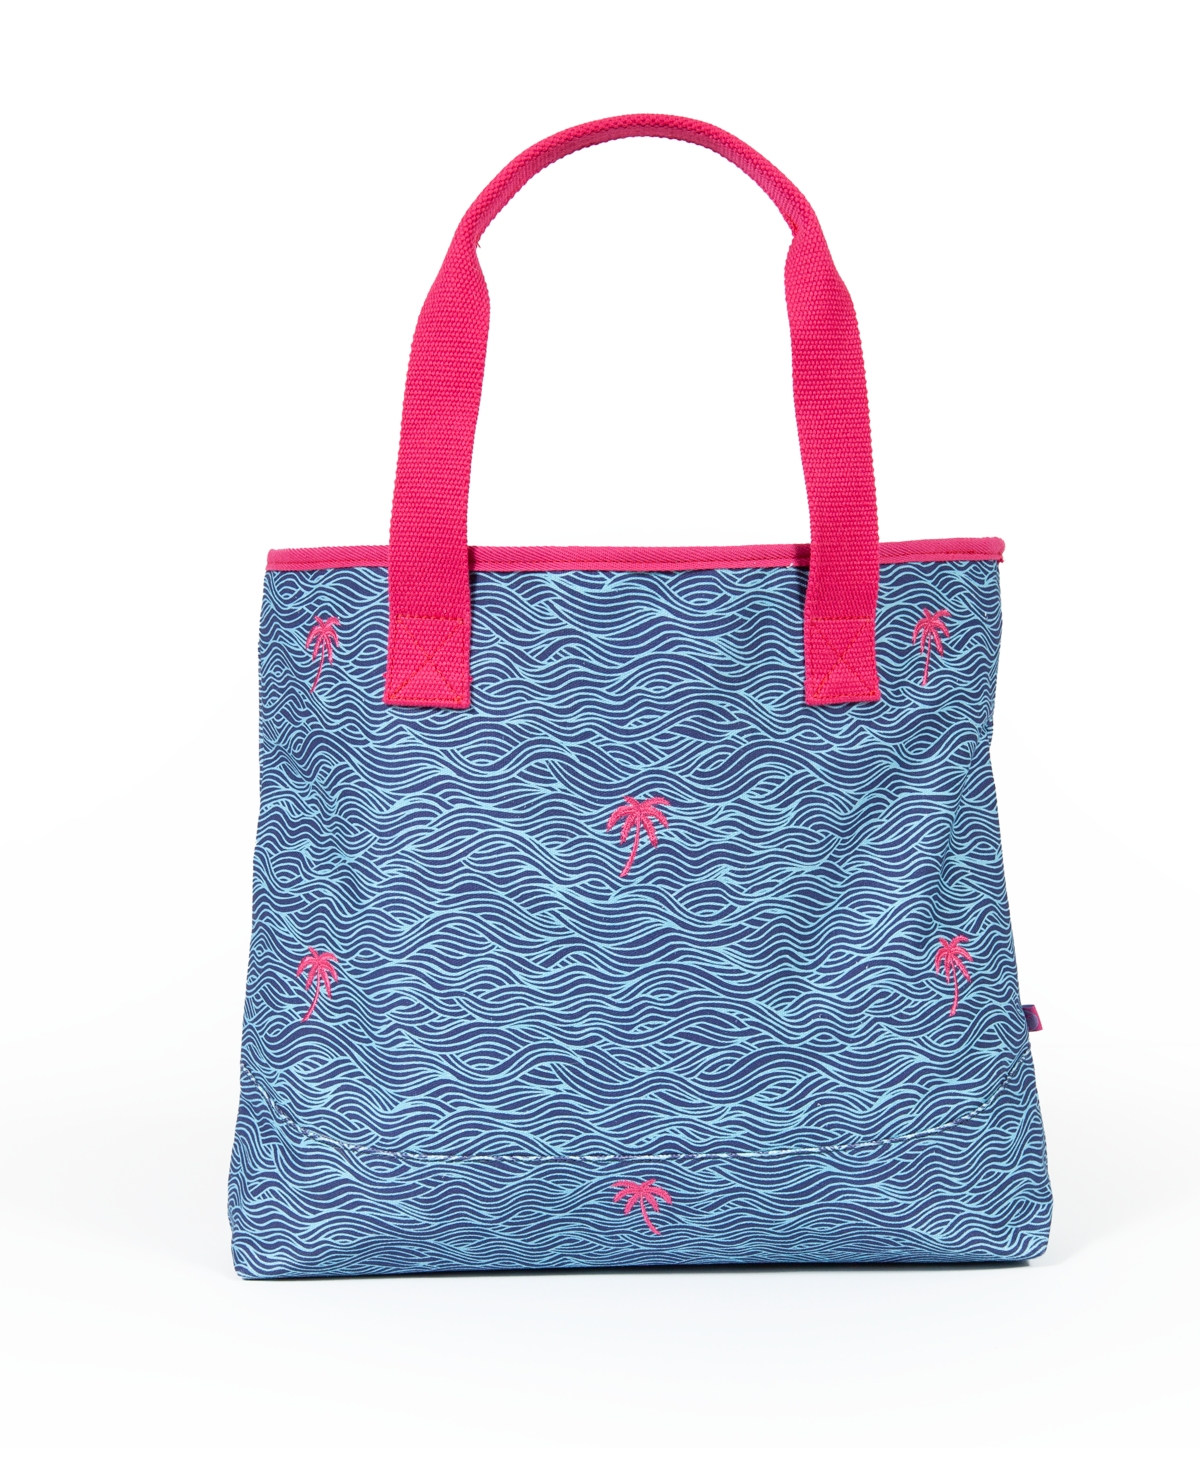 Extra Large, 100% Cotton Canvas Carryall Tote Bag - Blue